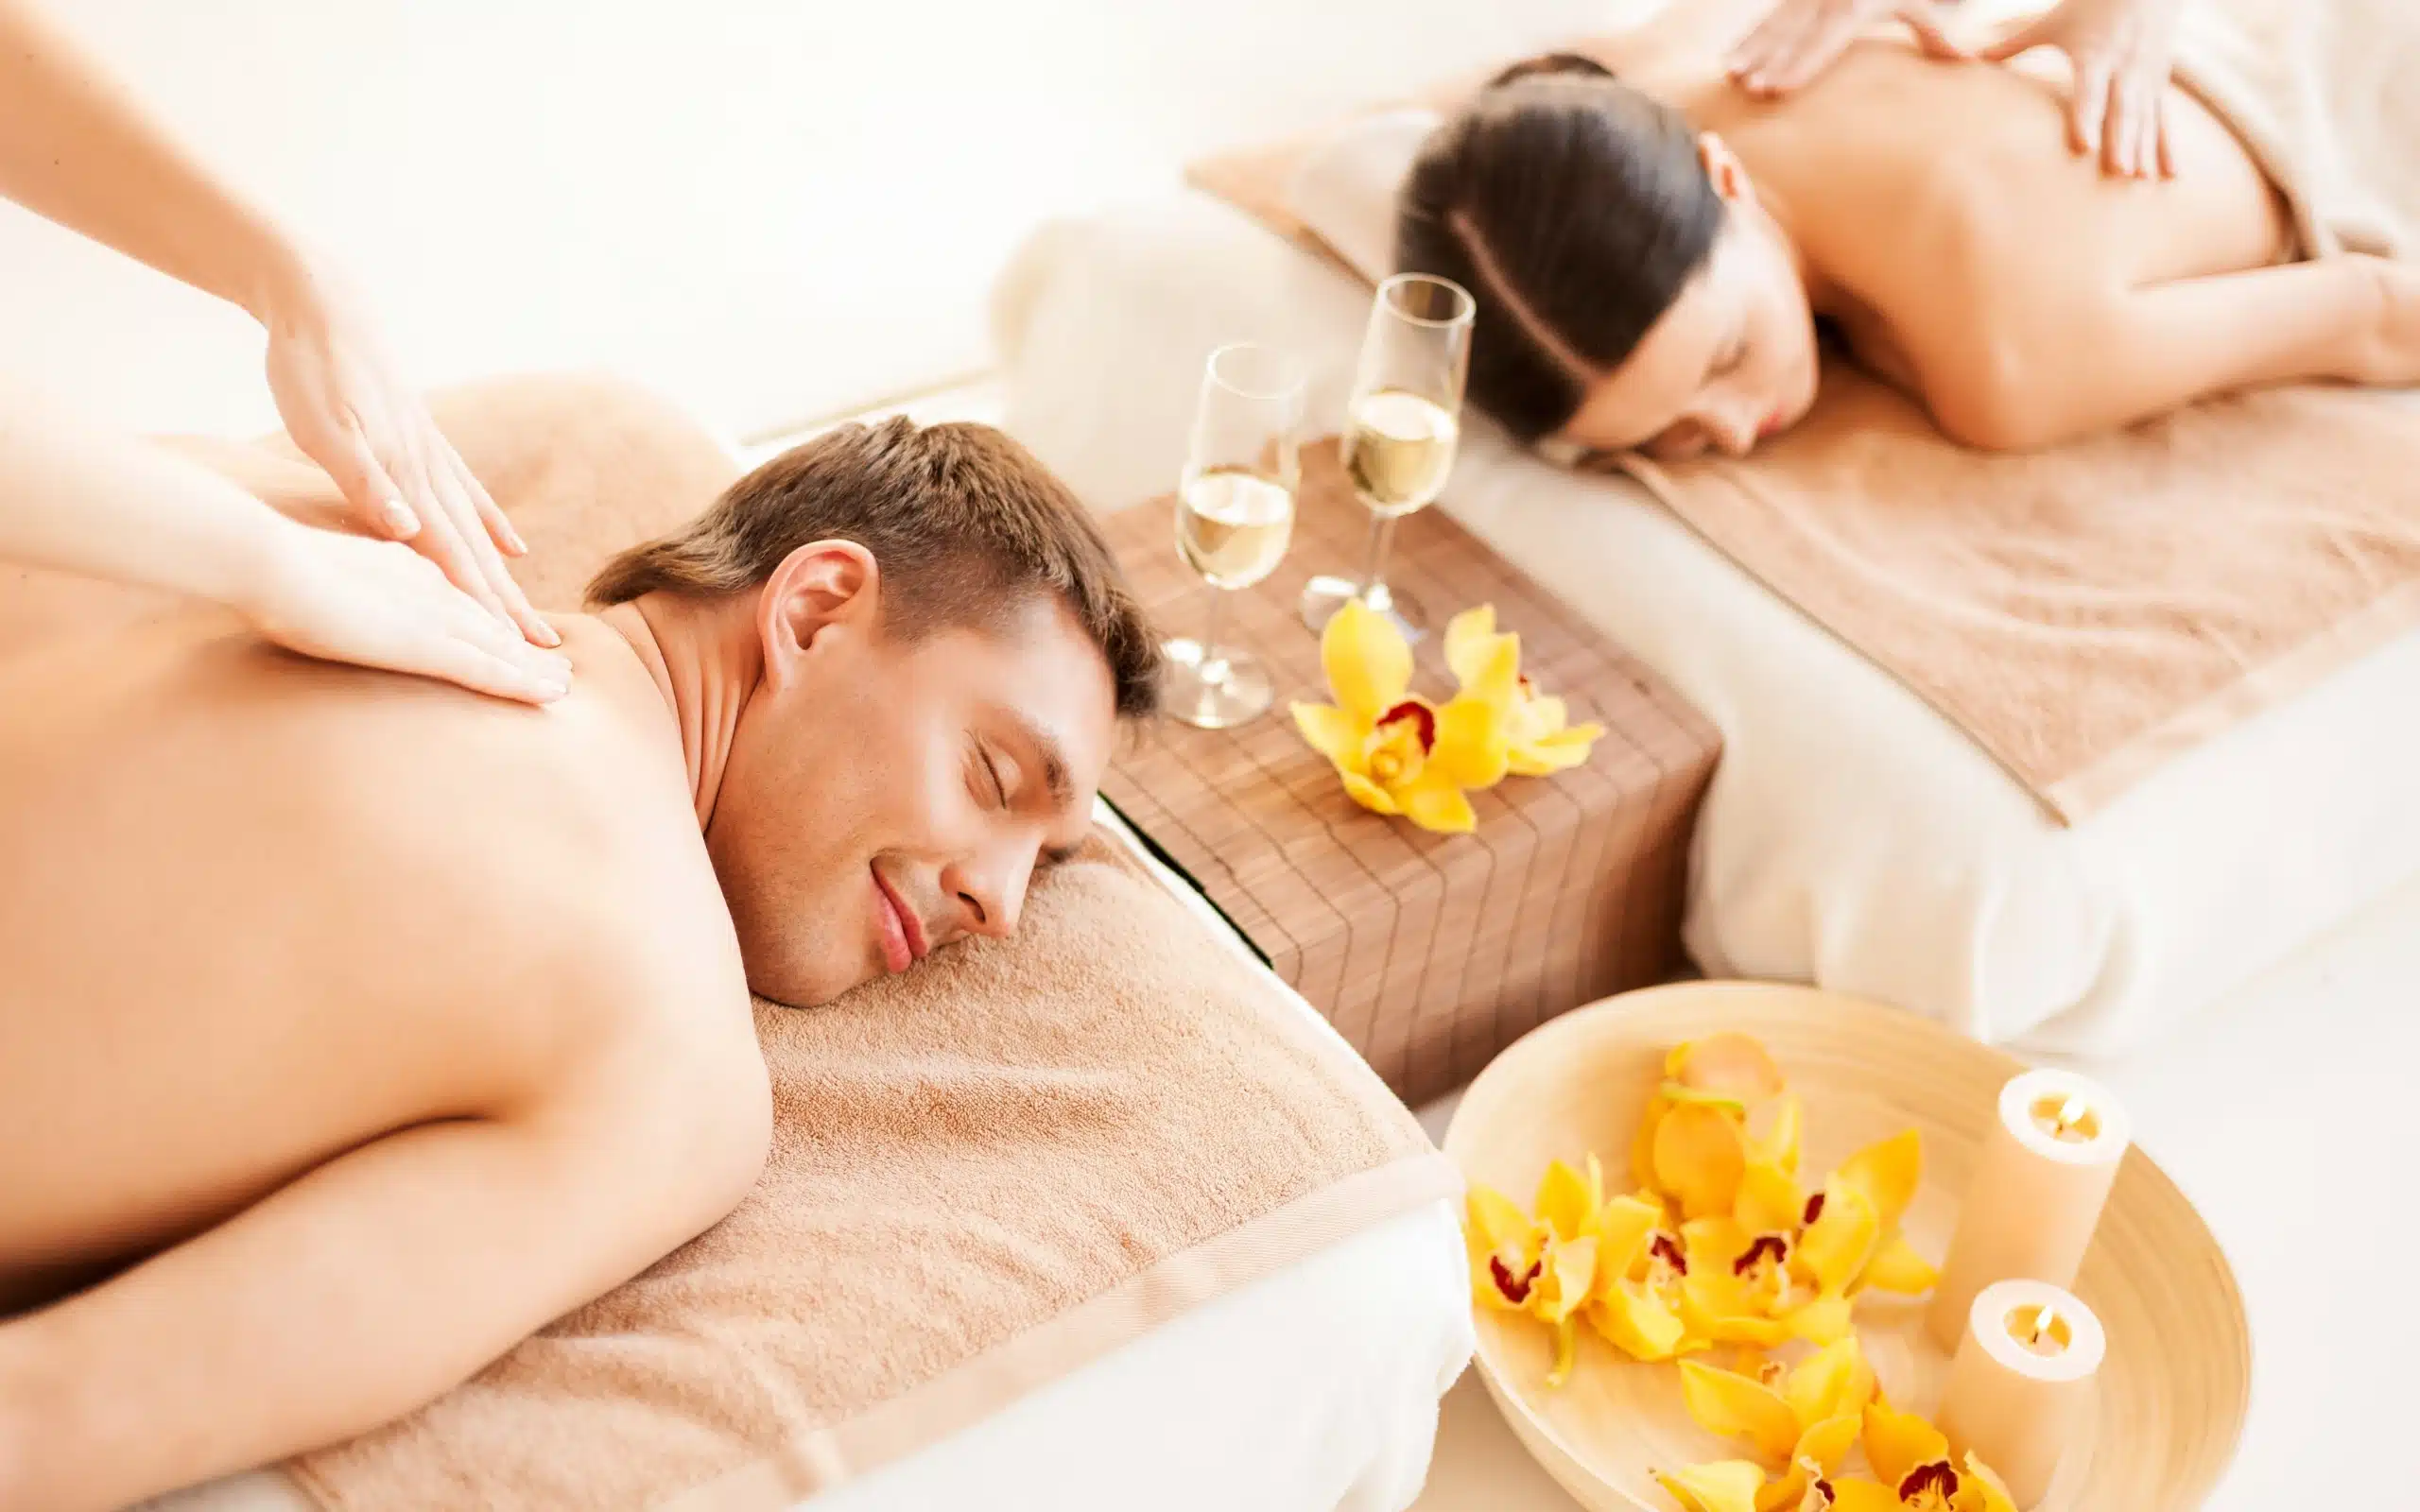 thalasso treatments basque country couple